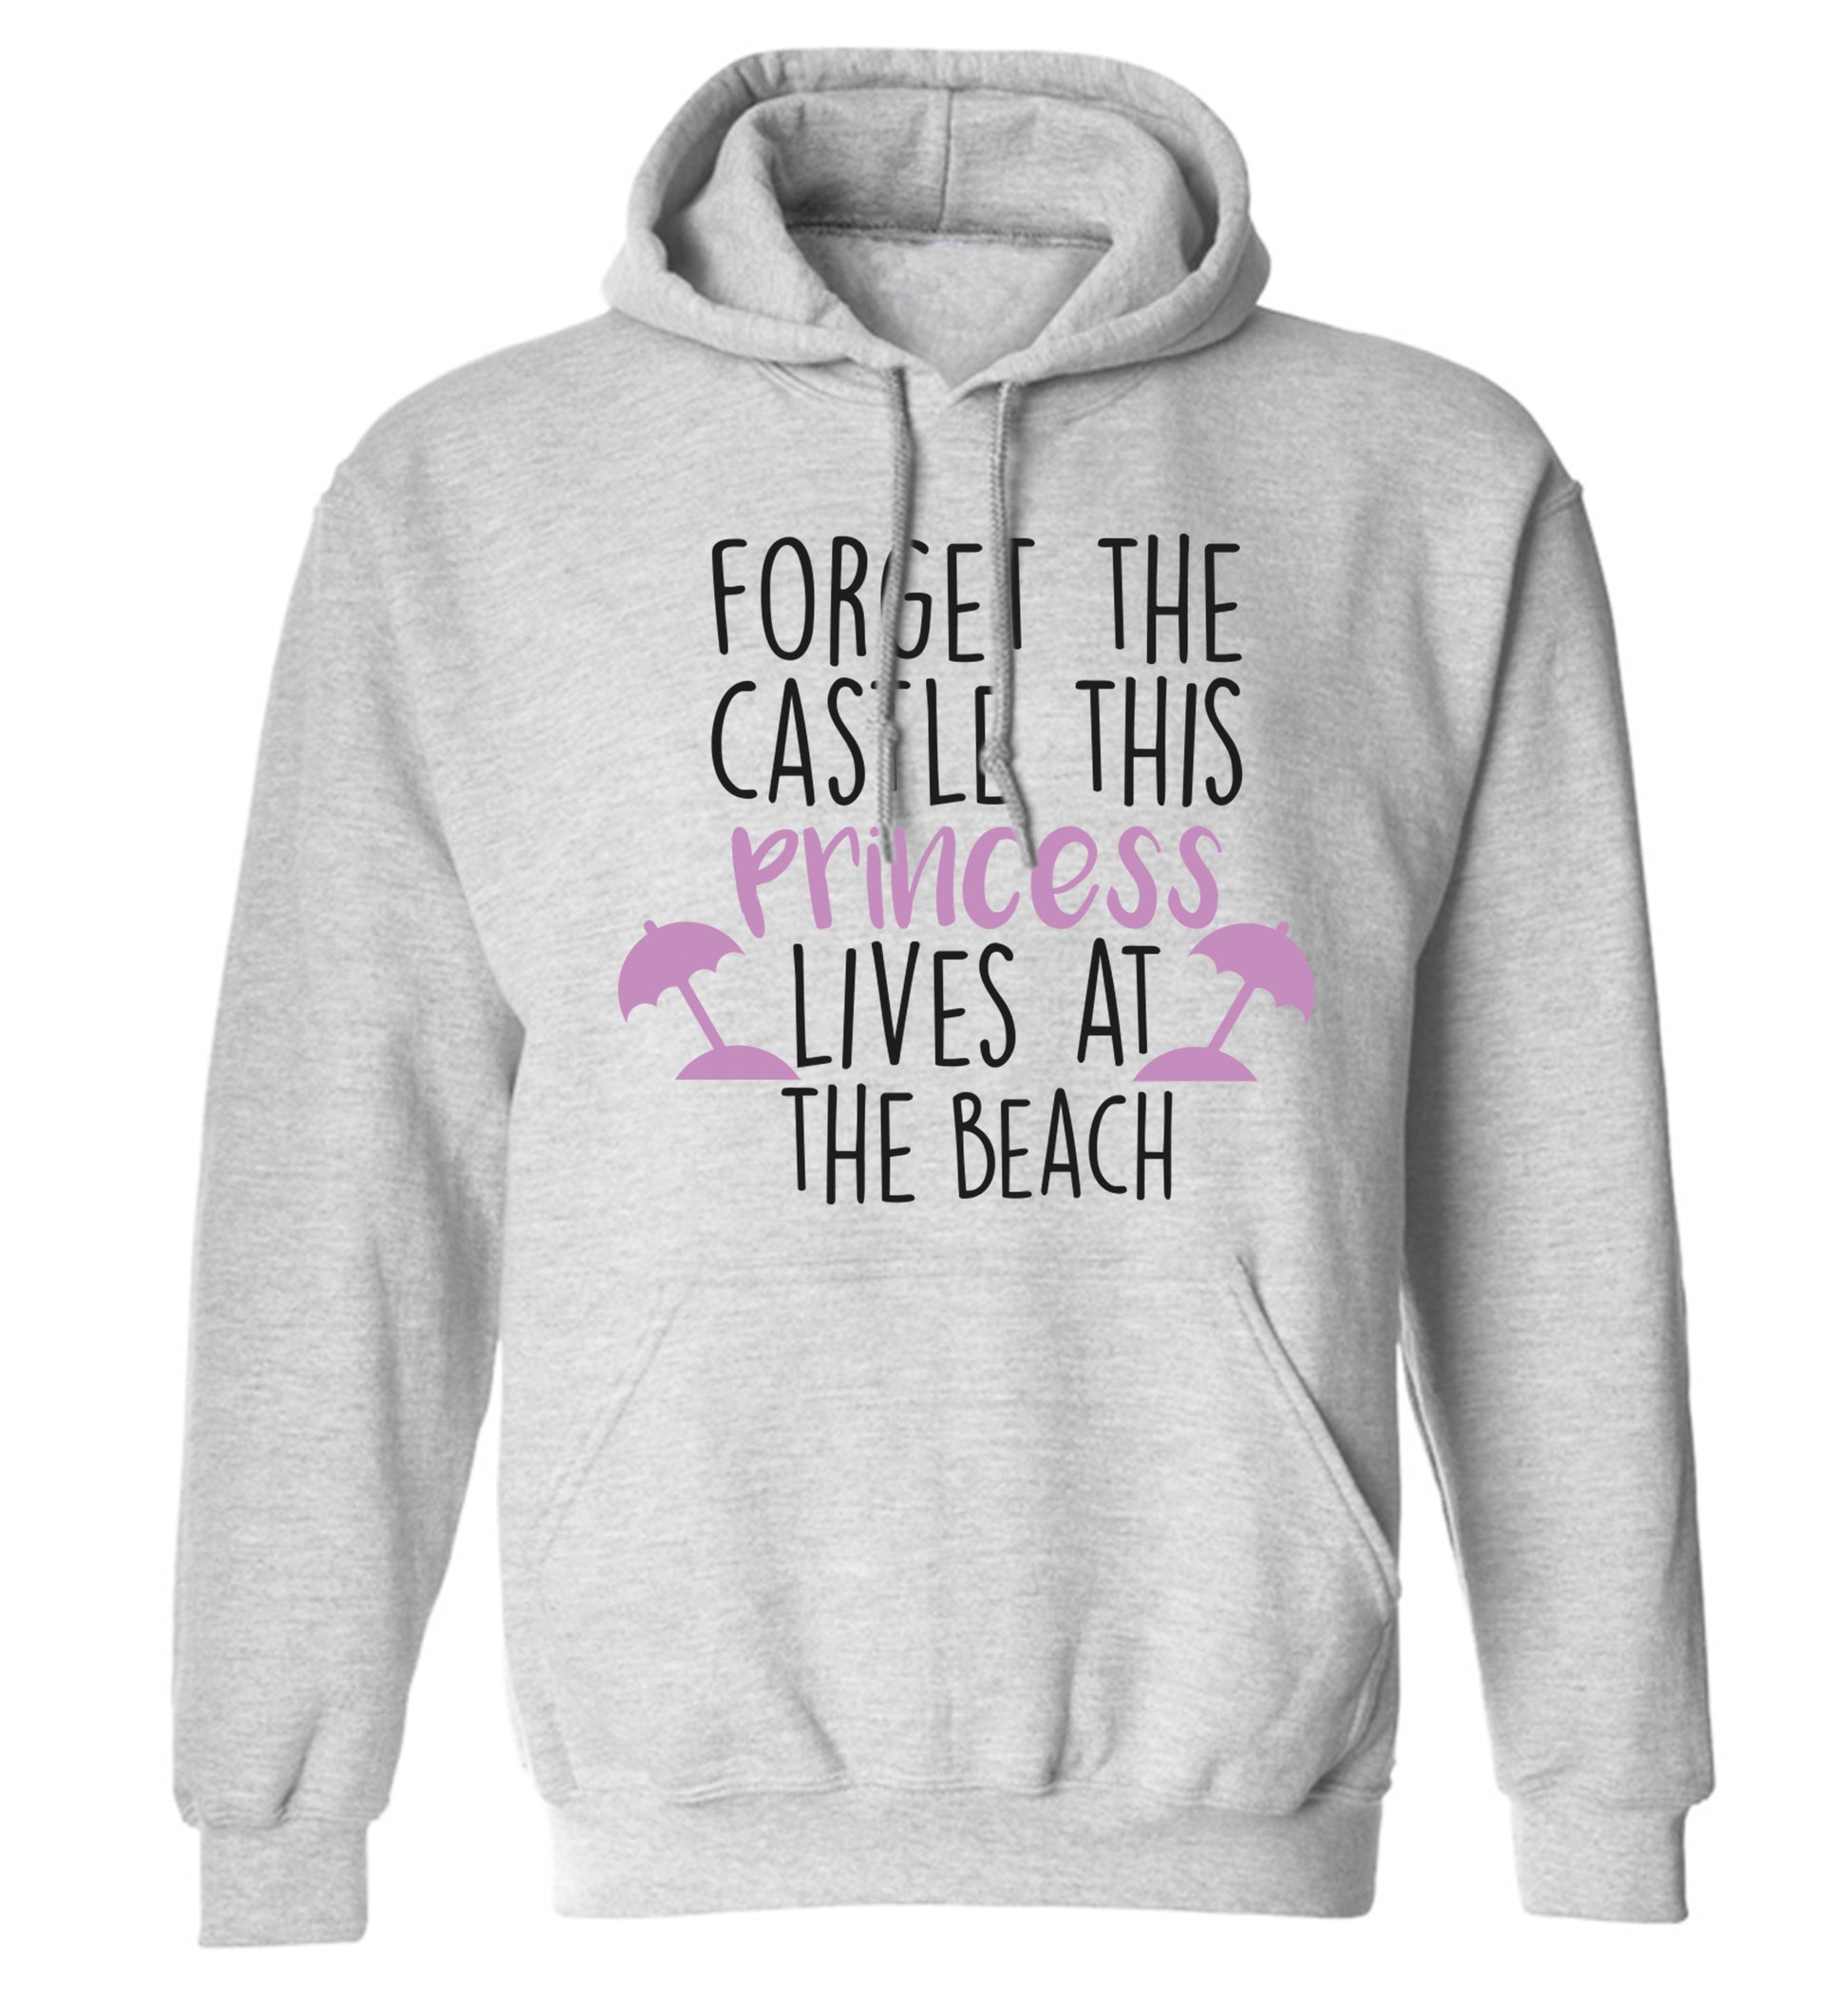 Forget the castle this princess lives at the beach adults unisex grey hoodie 2XL